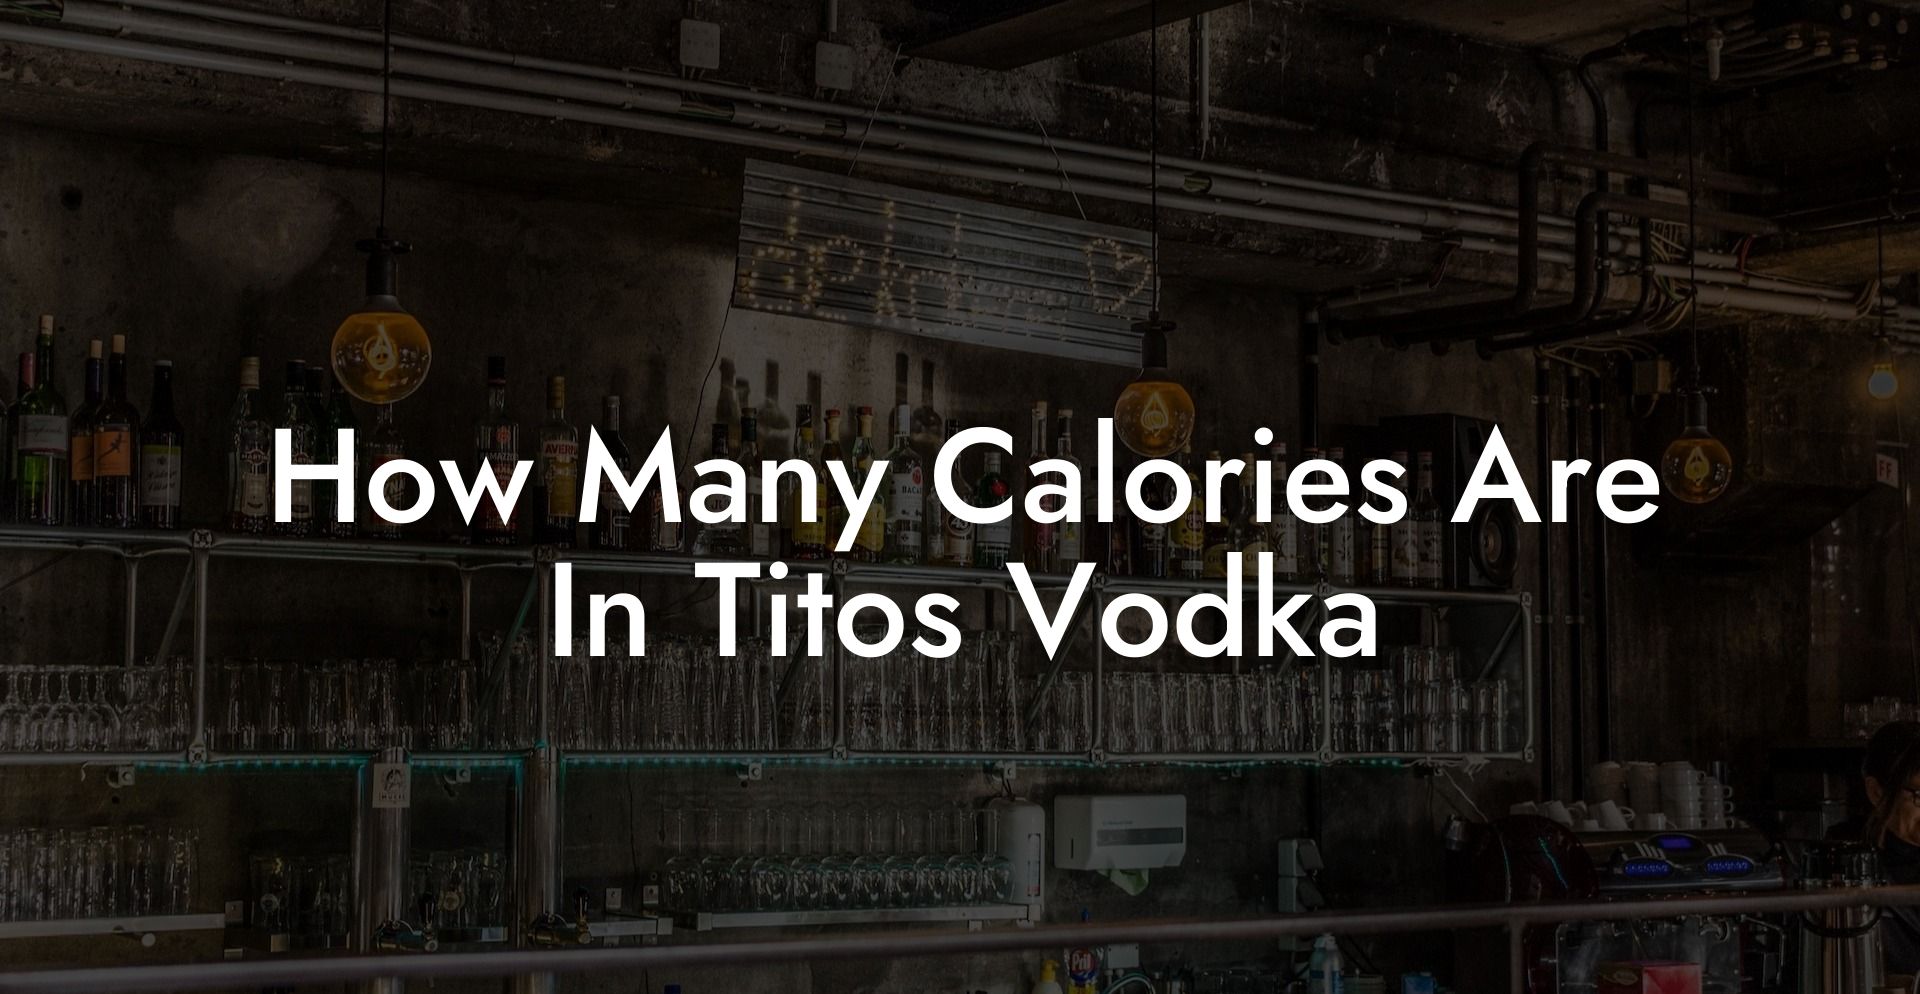 How Many Calories Are In Tito's Vodka